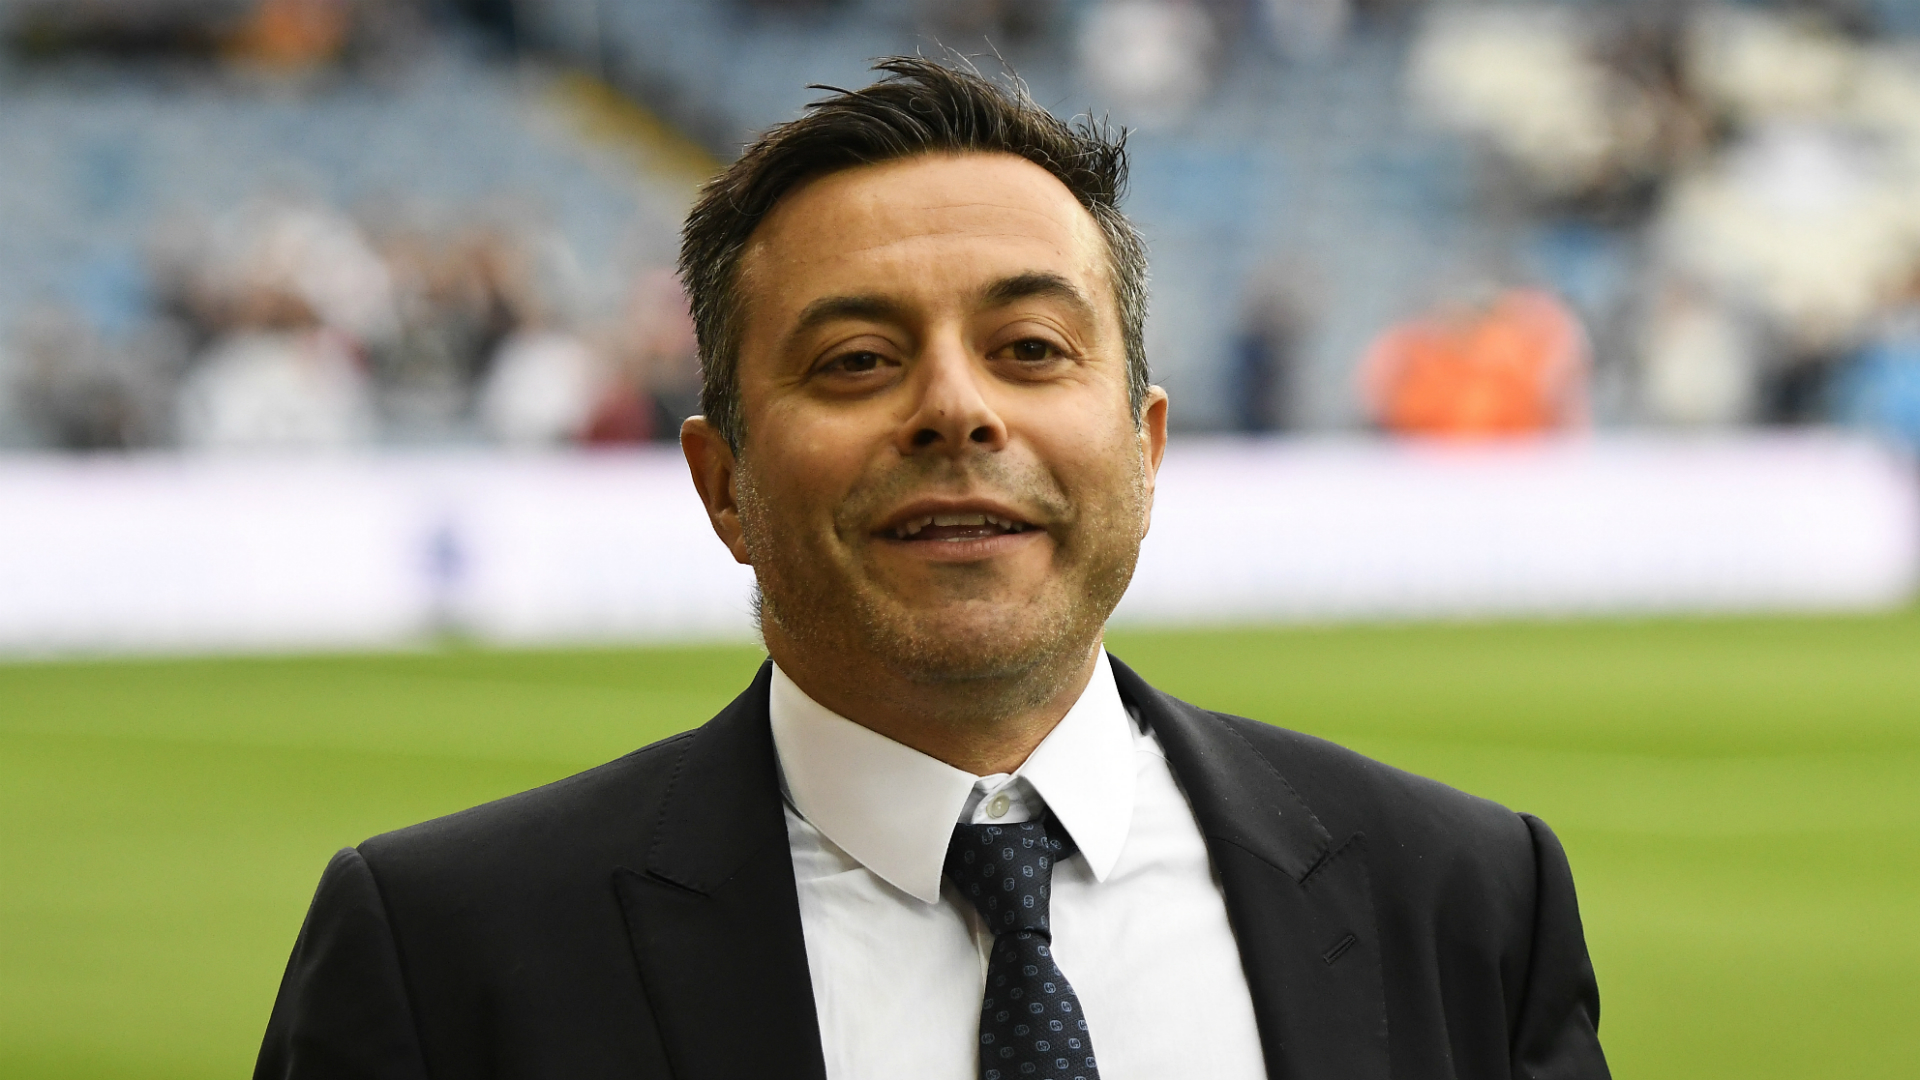 Leeds owner doubles down as club criticised over tweet aimed at TV pundit Carney